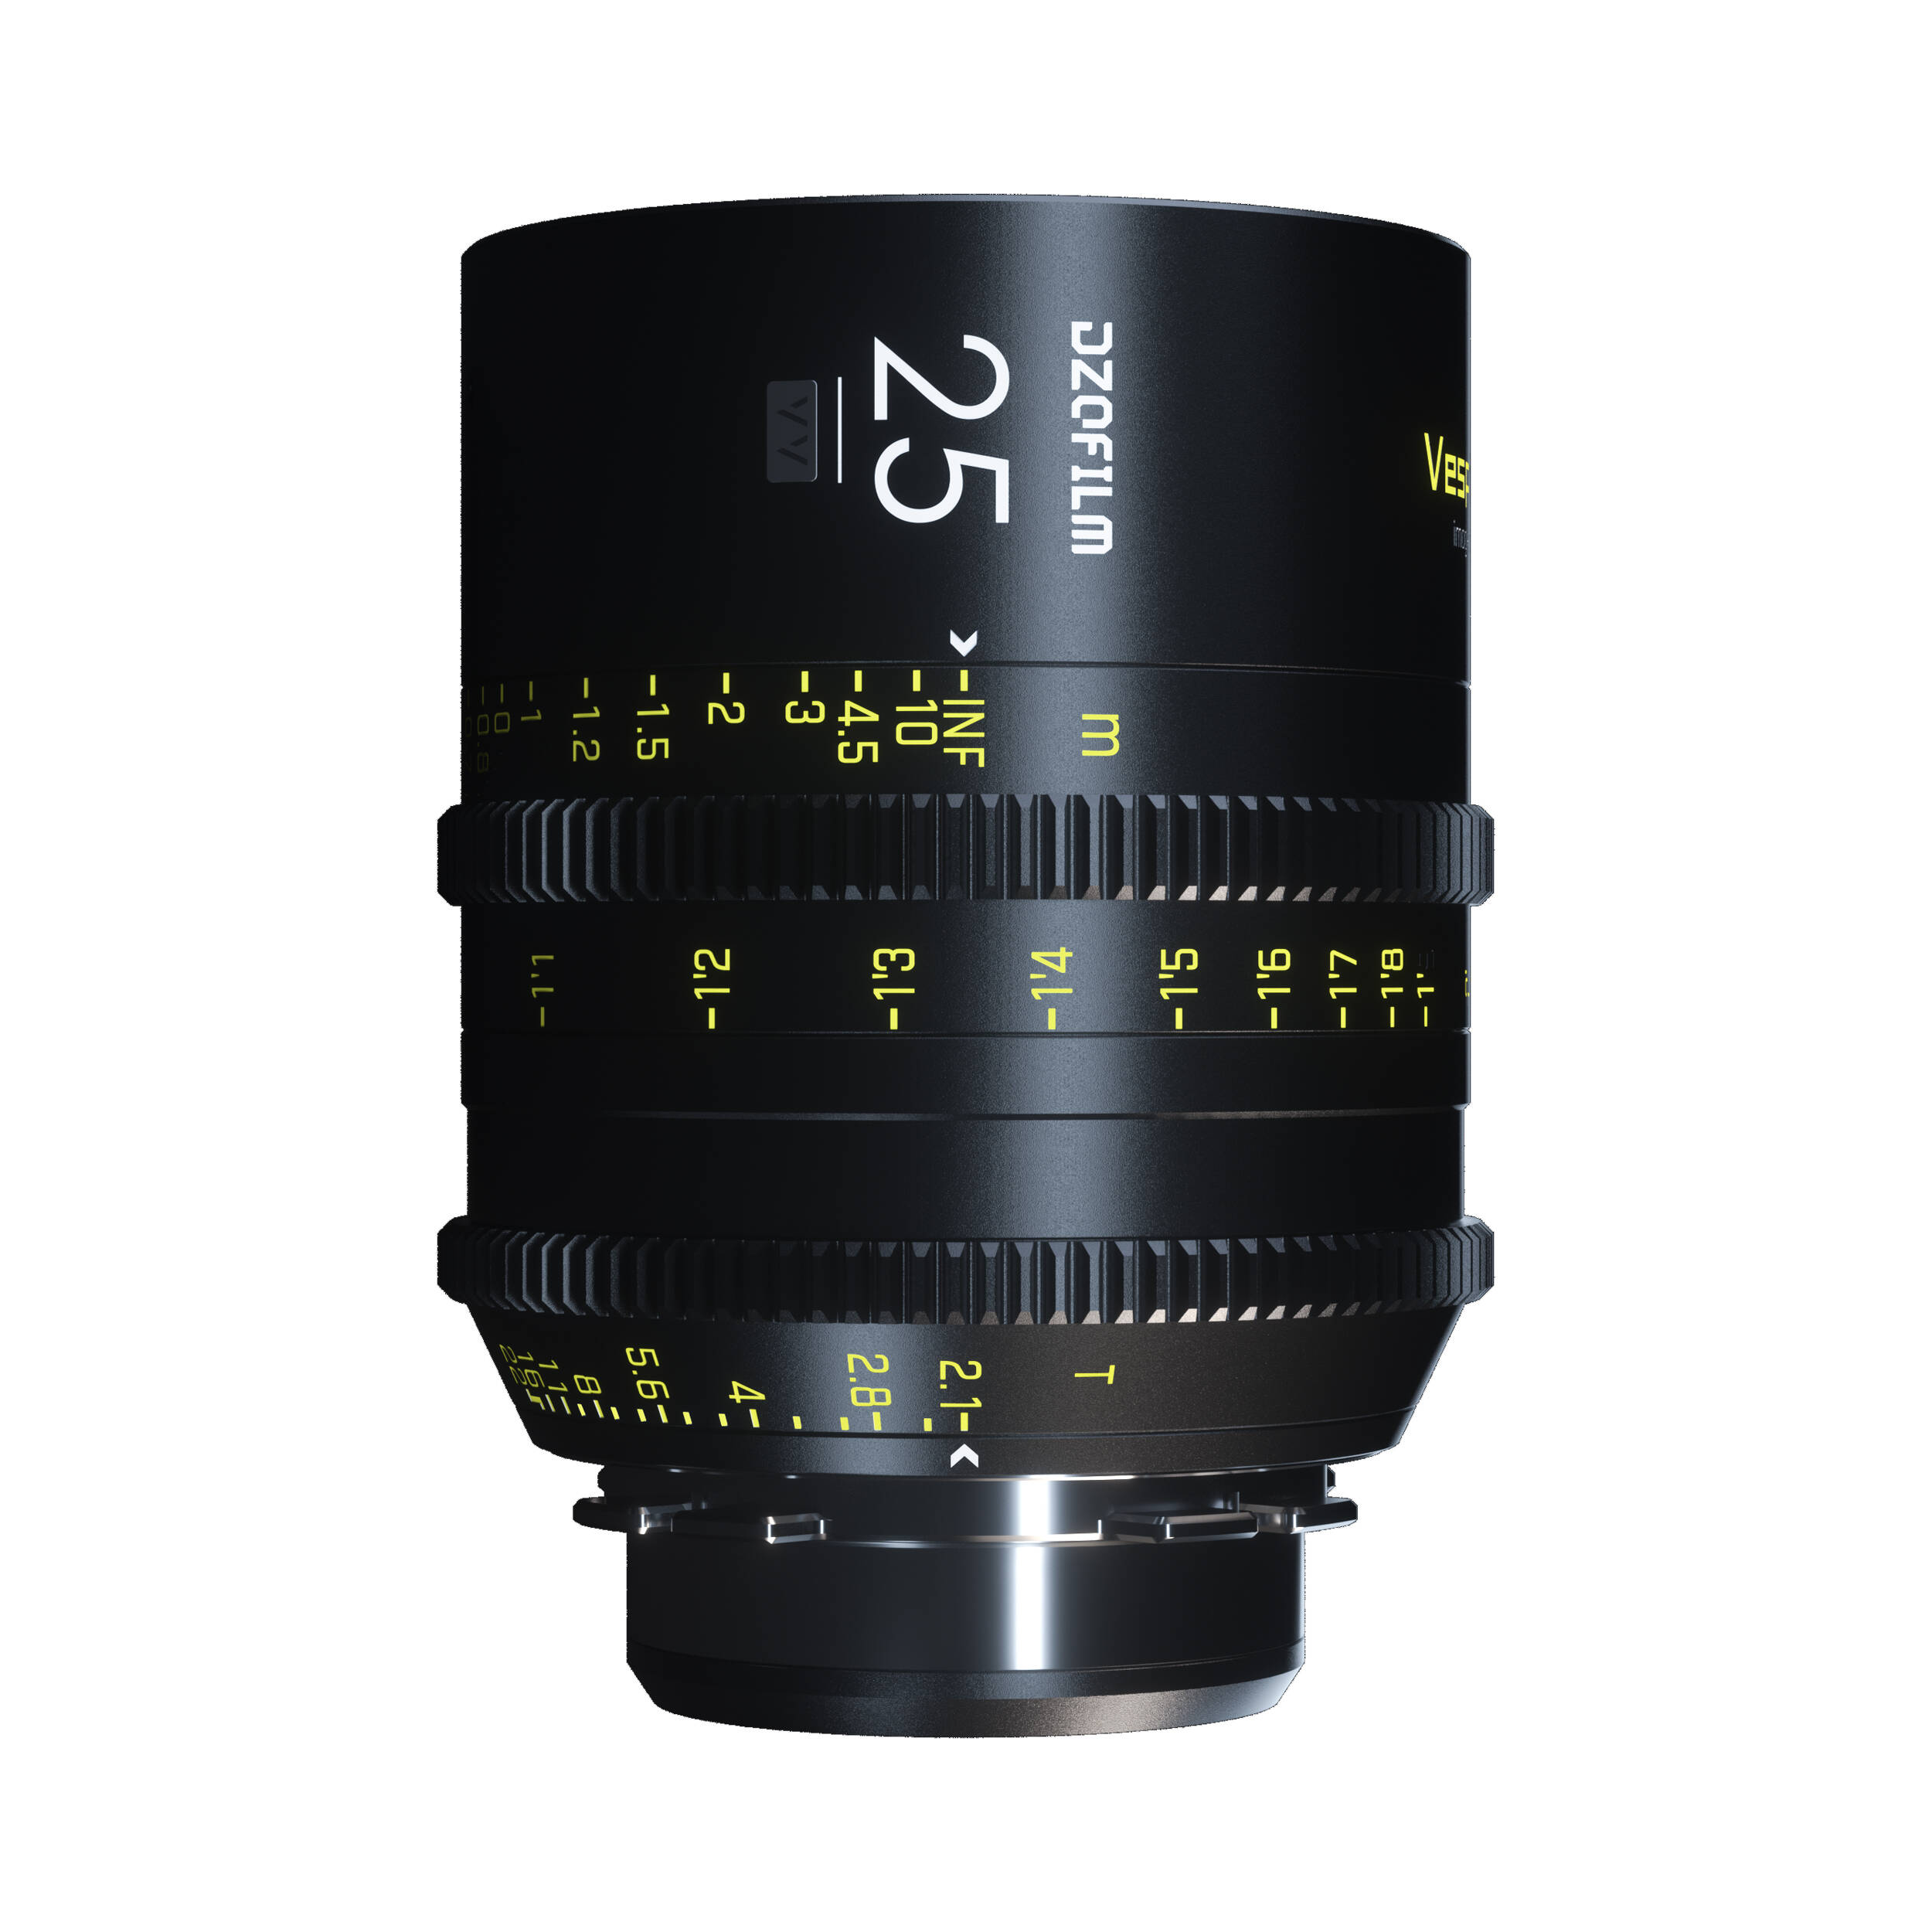 DZOFilm VESPID 25mm T2.1 Lens - PL mount with Canon EF adapter